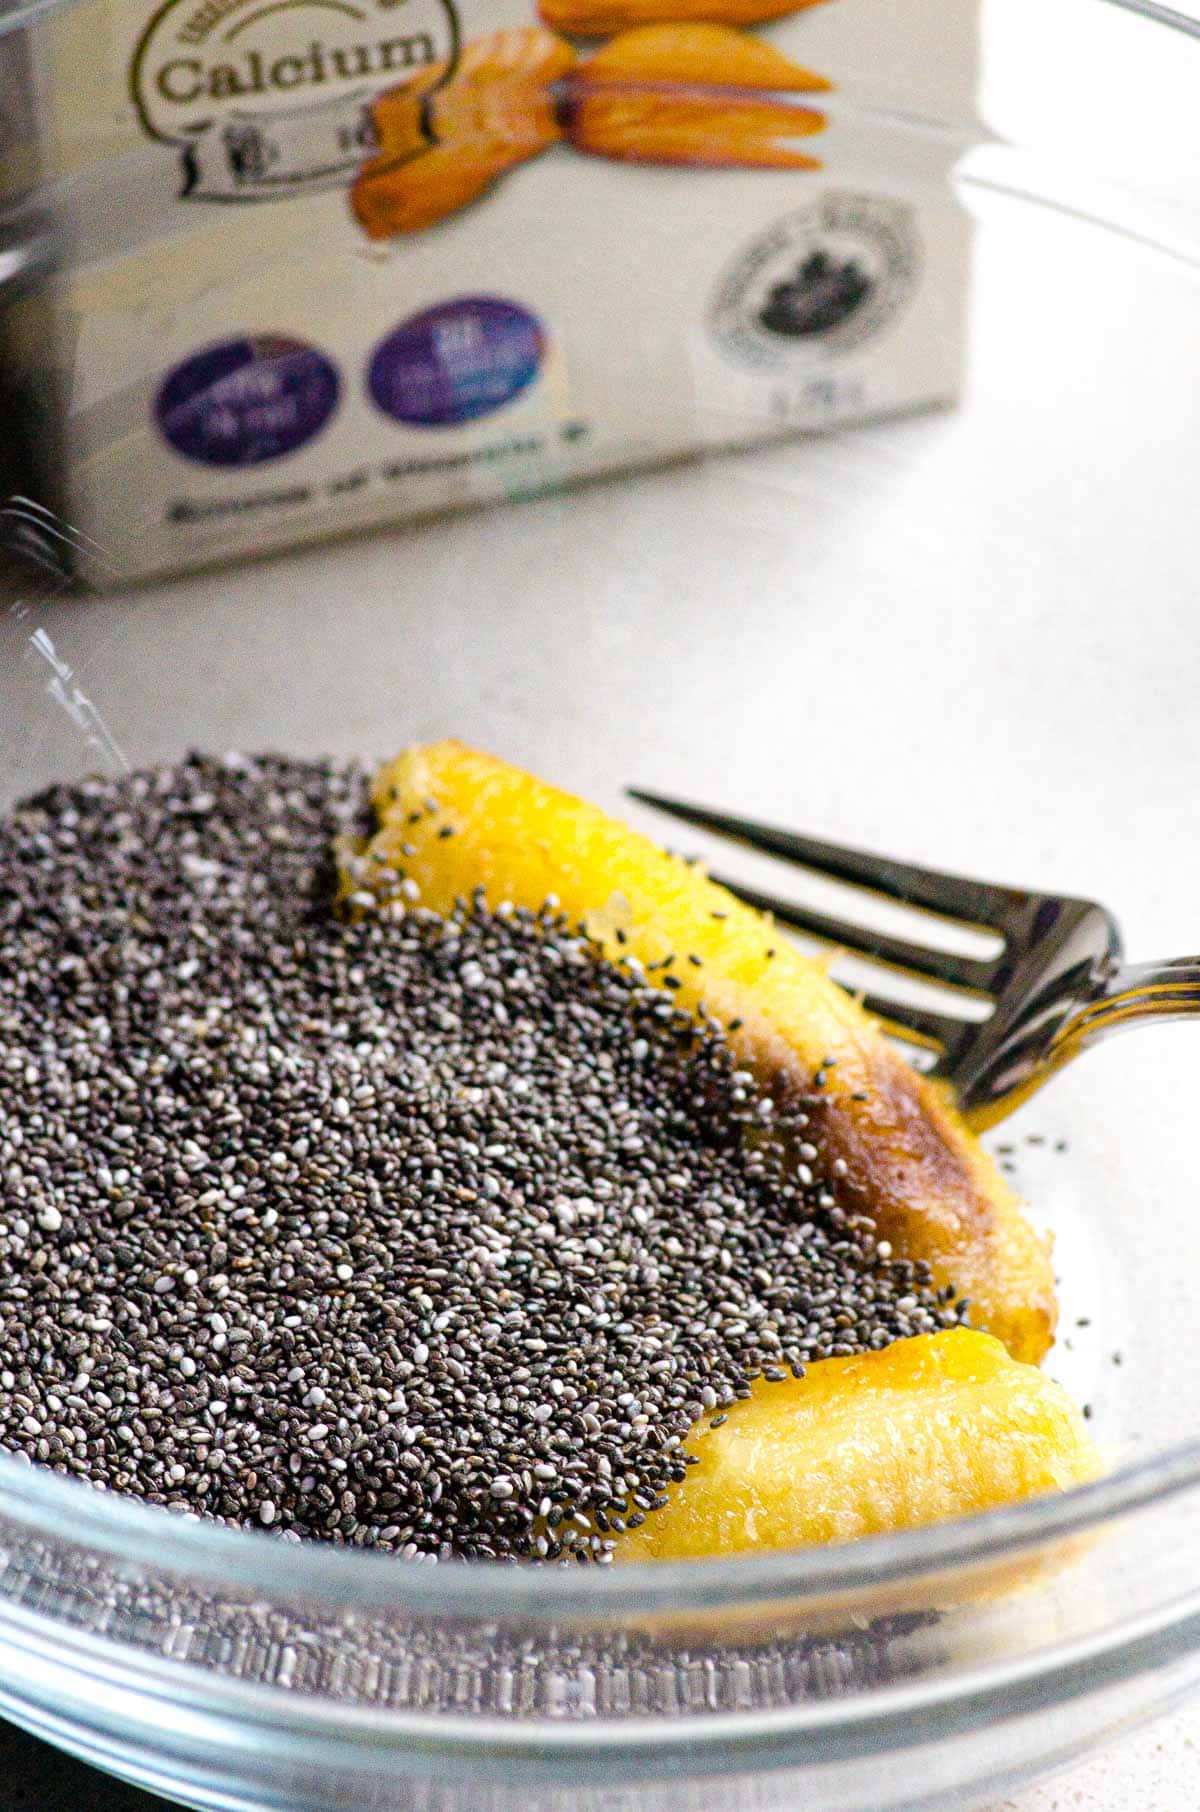 Banana and chia seeds in a bowl with the fork.